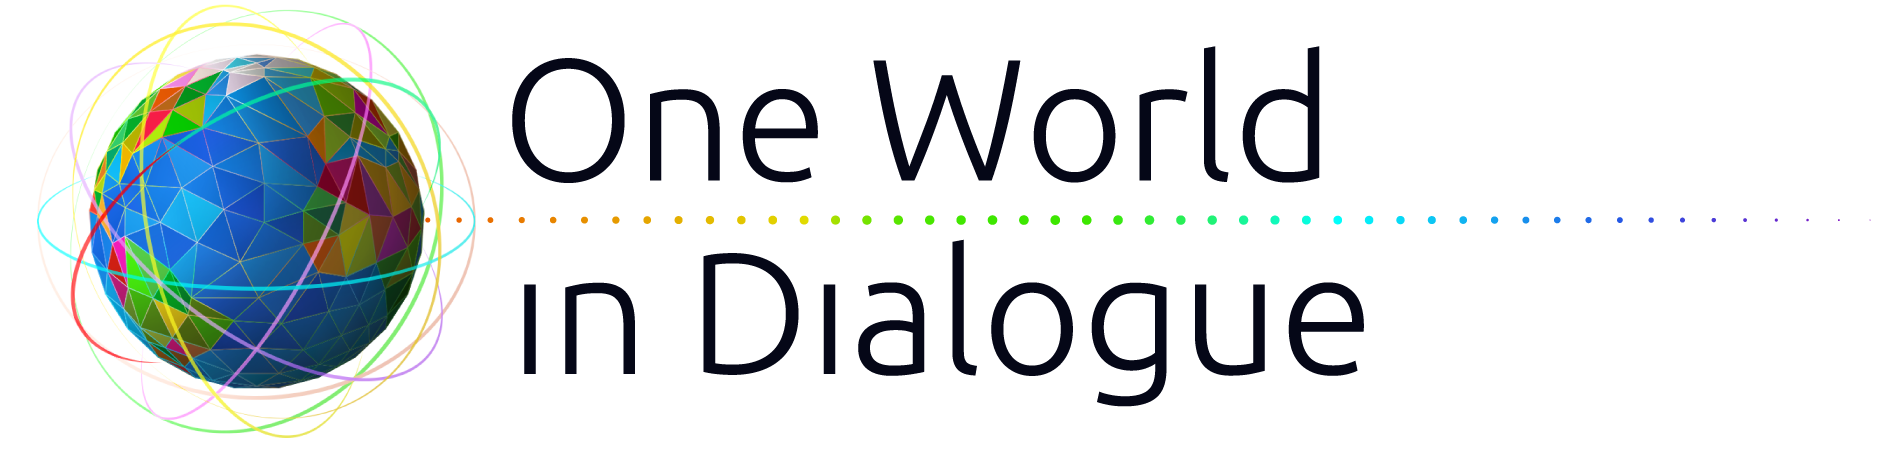 World dialog. One World. One World members. First мир.